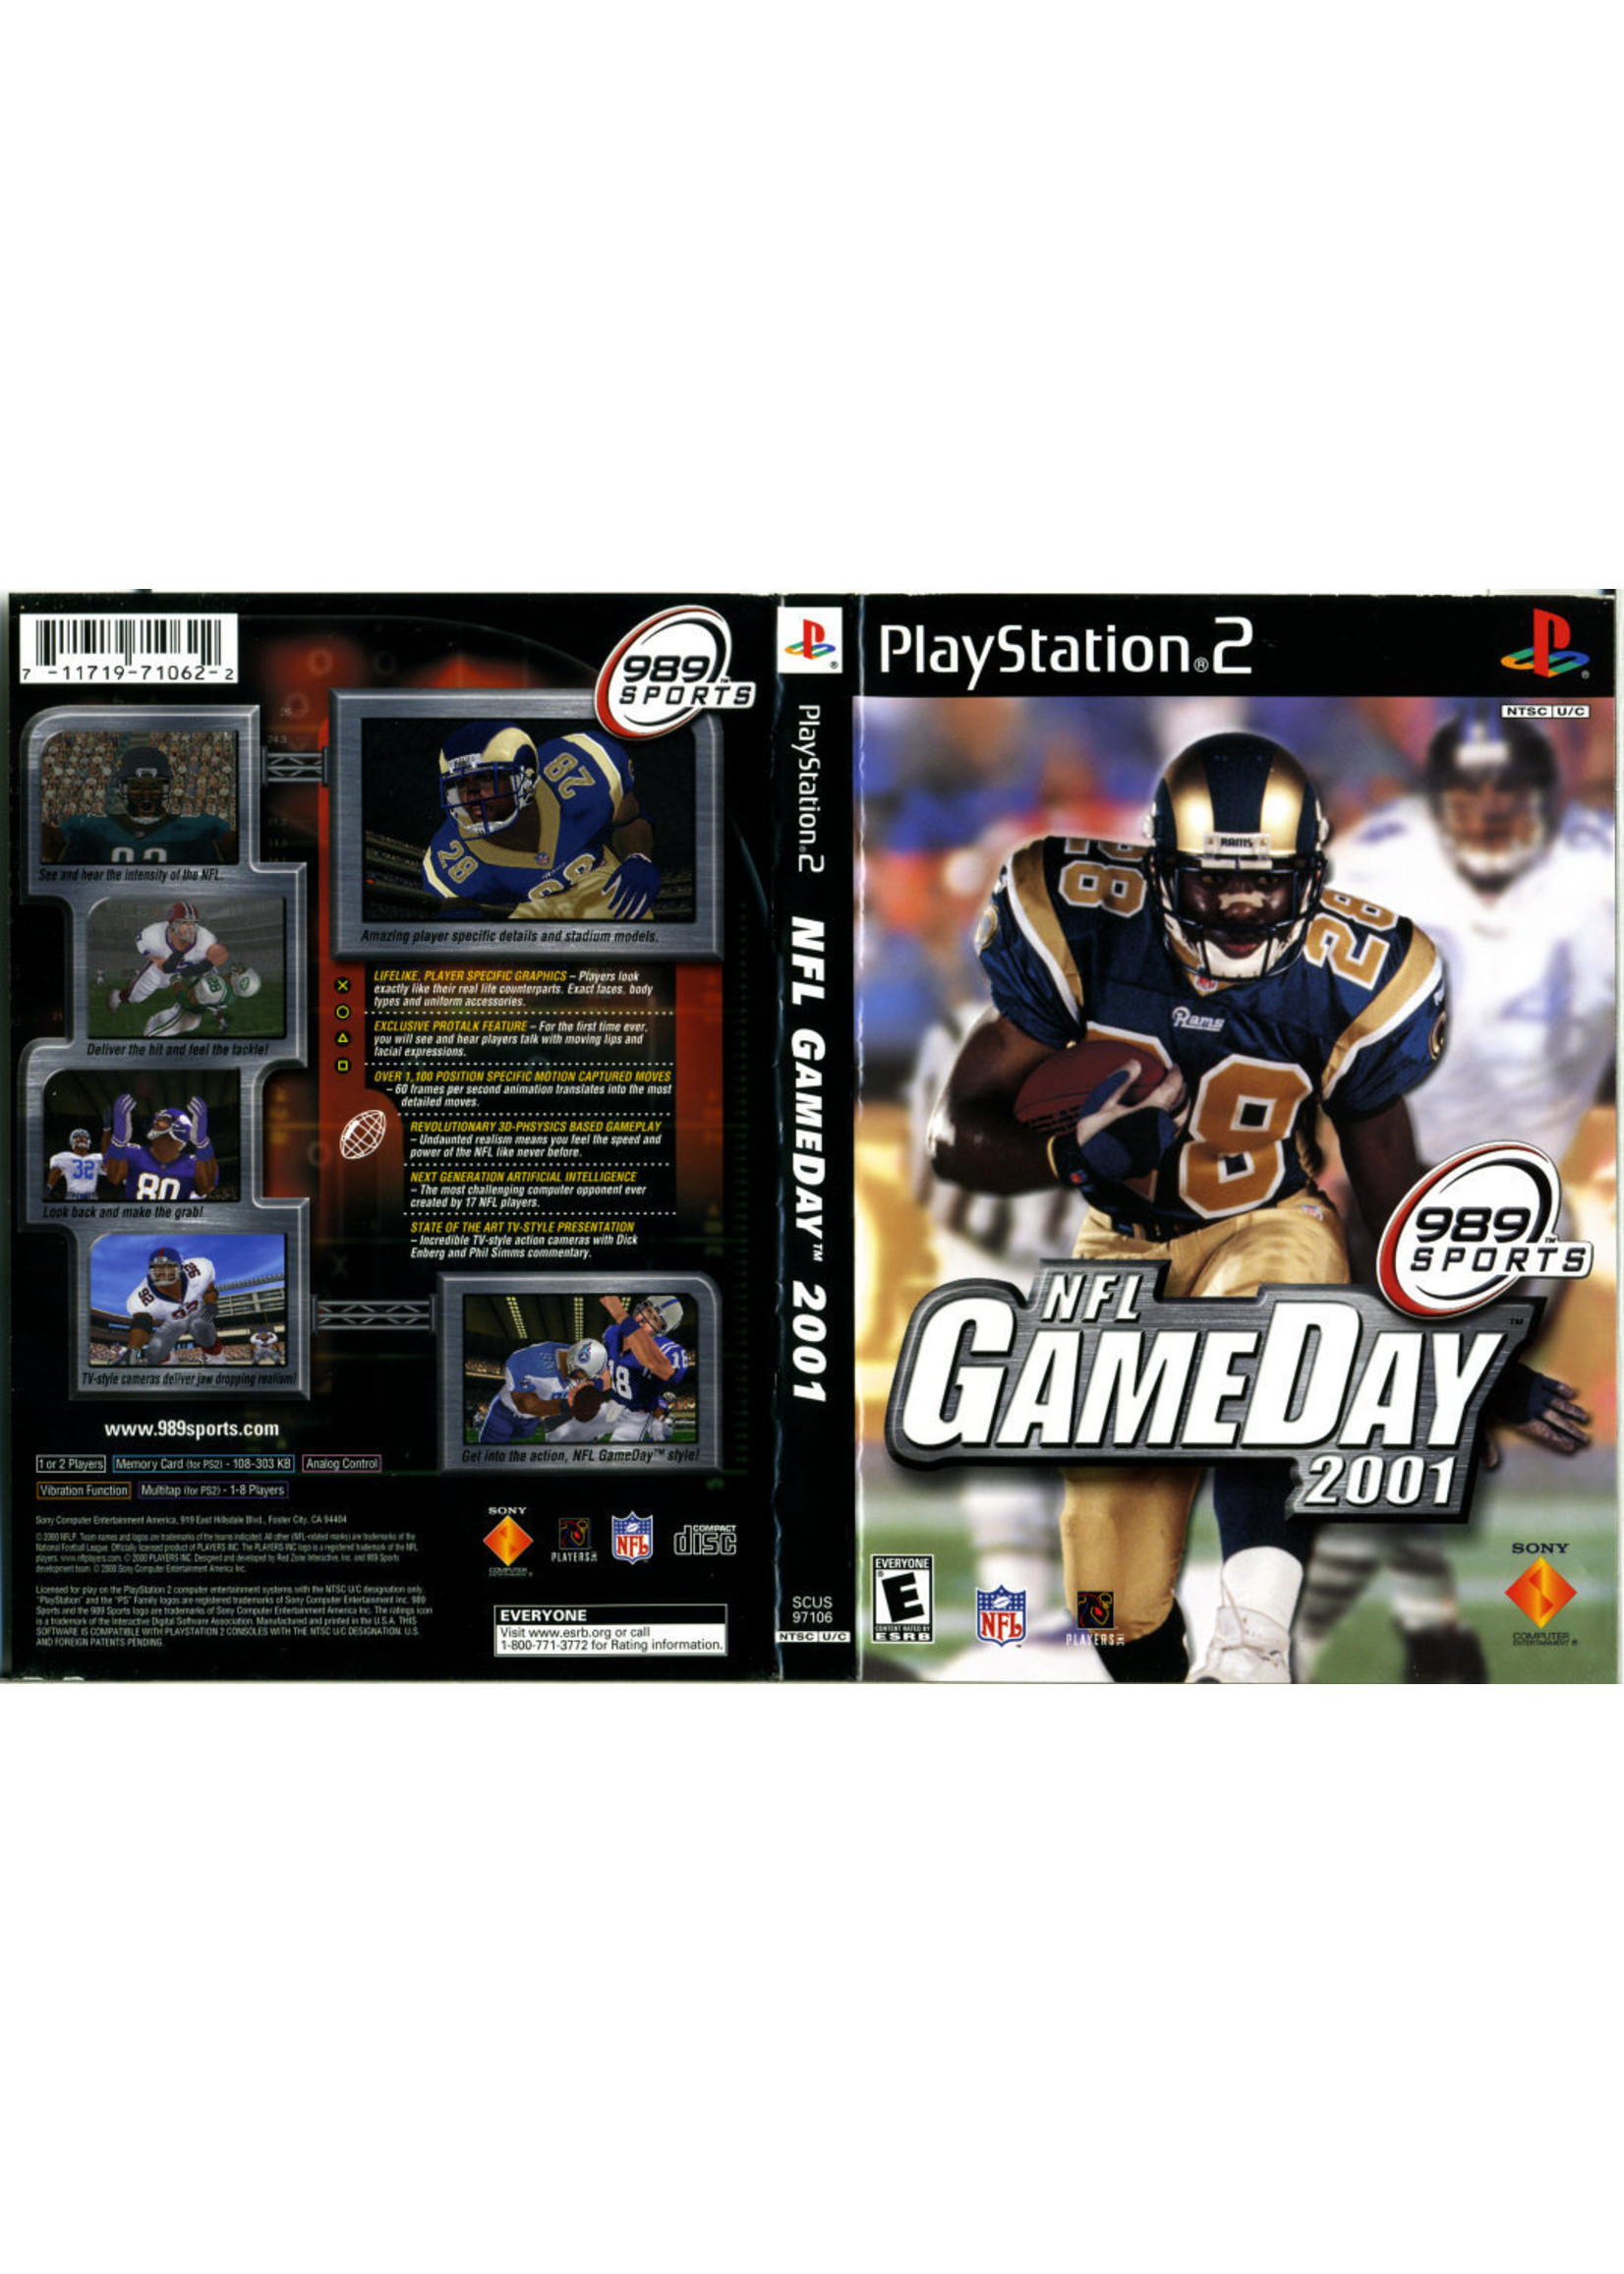 Sony Playstation 2 (PS2) NFL GameDay 2001